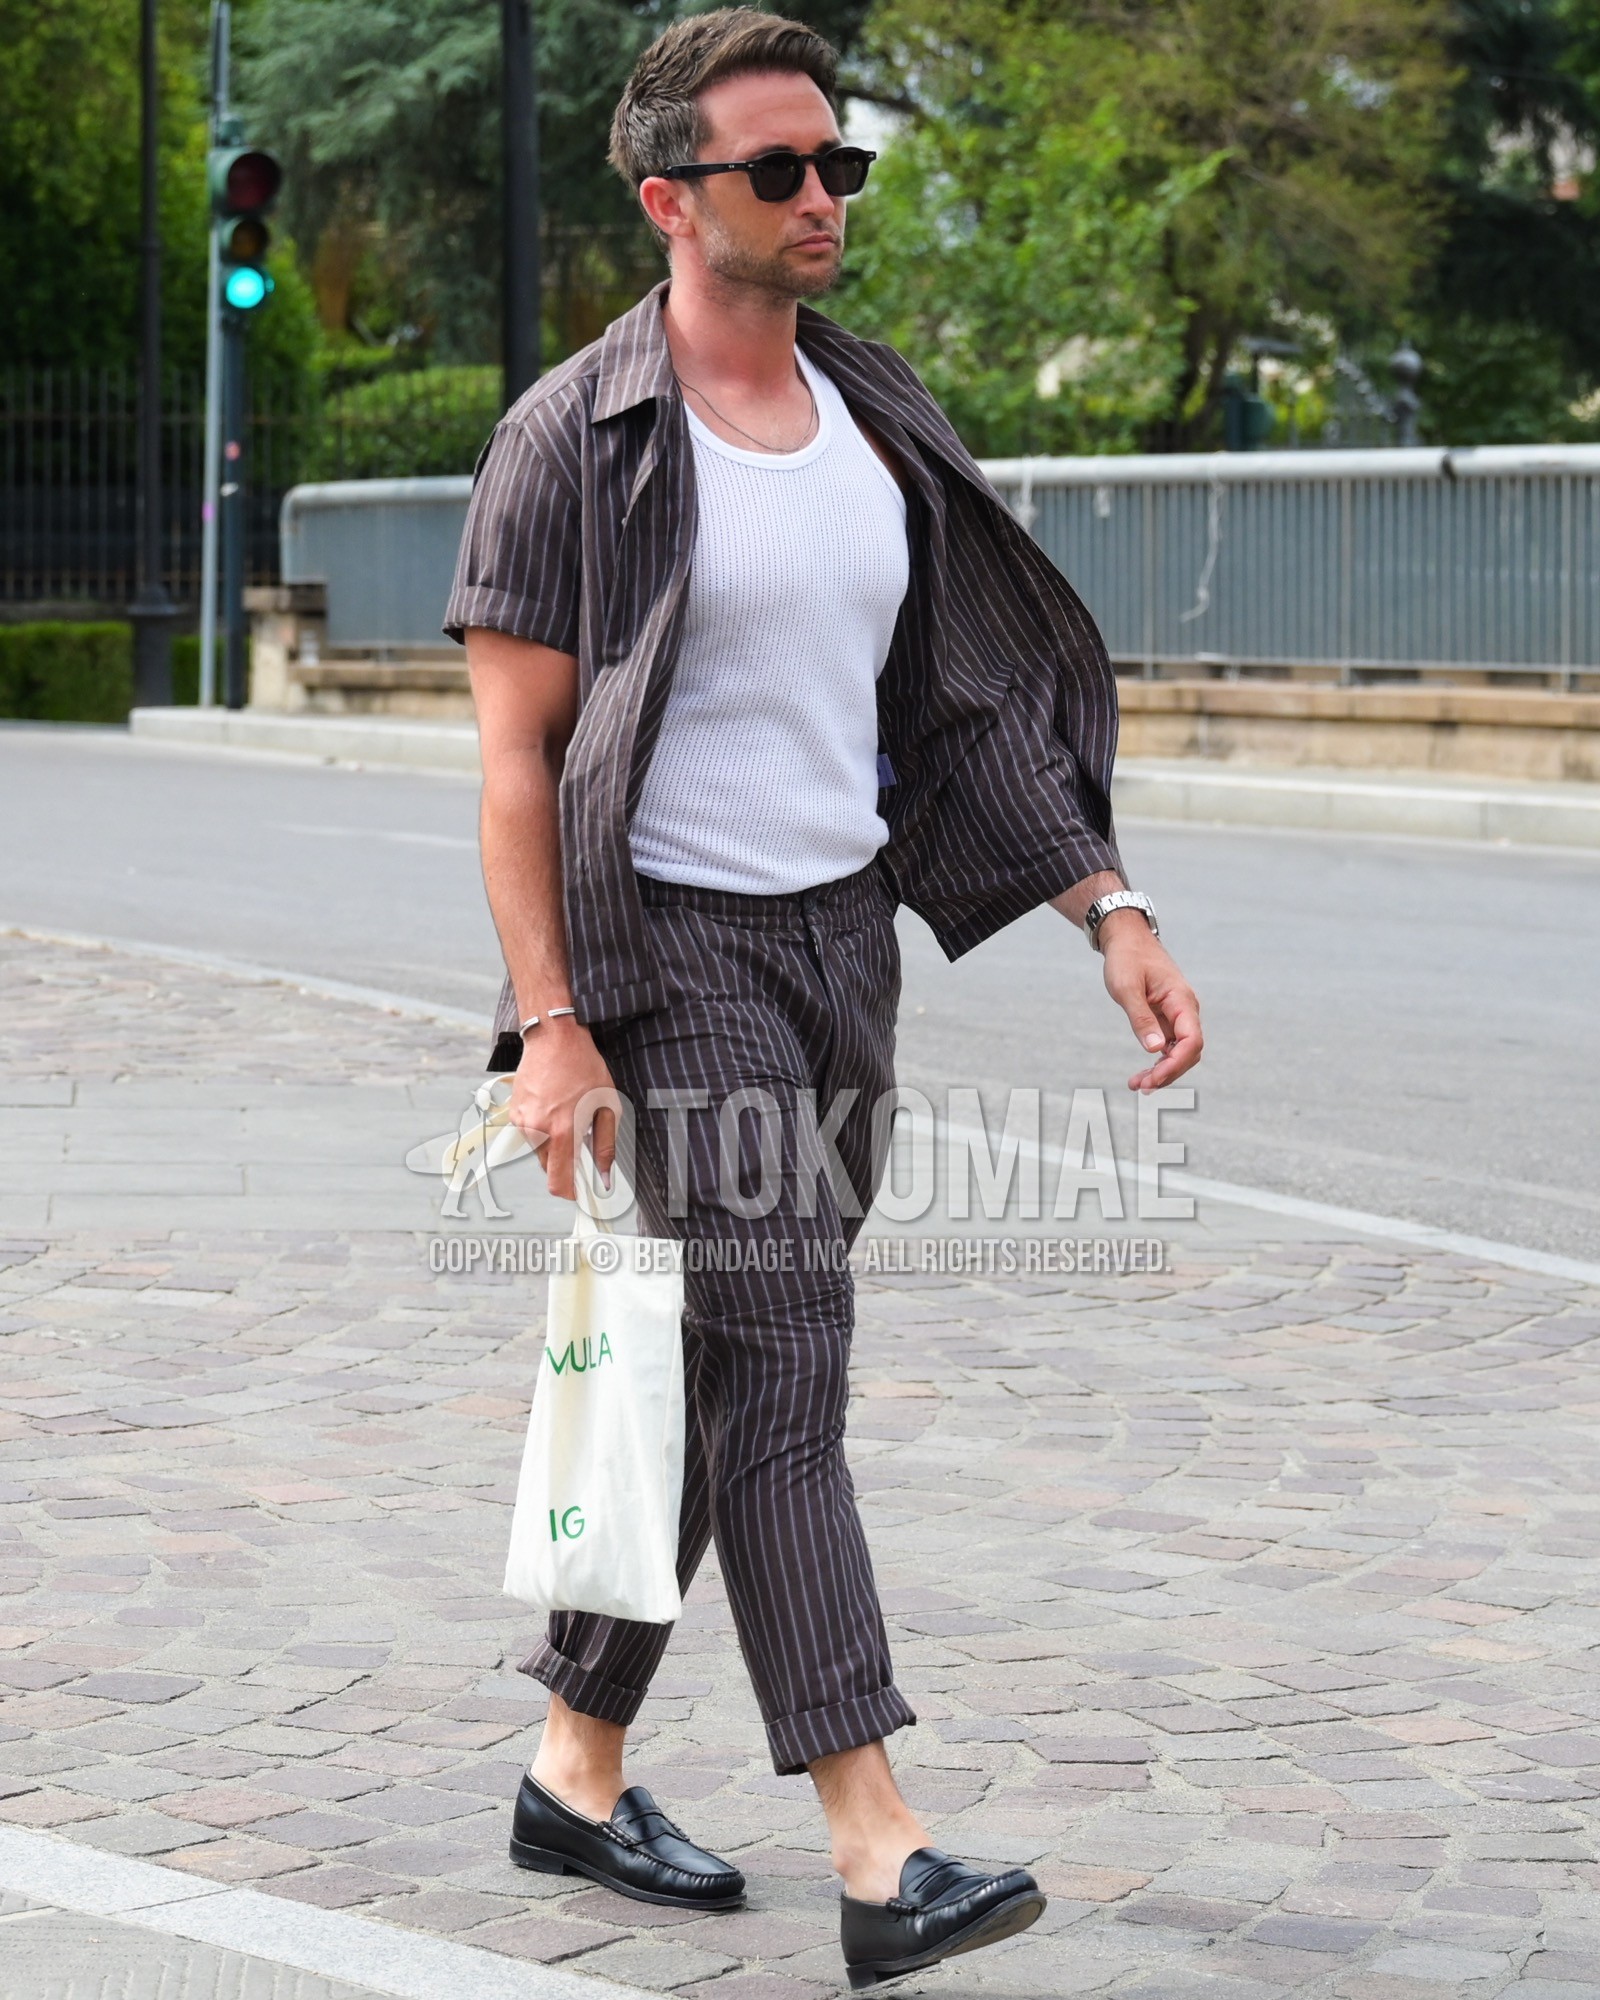 Men's spring summer outfit with black plain sunglasses, white plain tank top, black coin loafers leather shoes, white lettered tote bag, brown stripes suit.